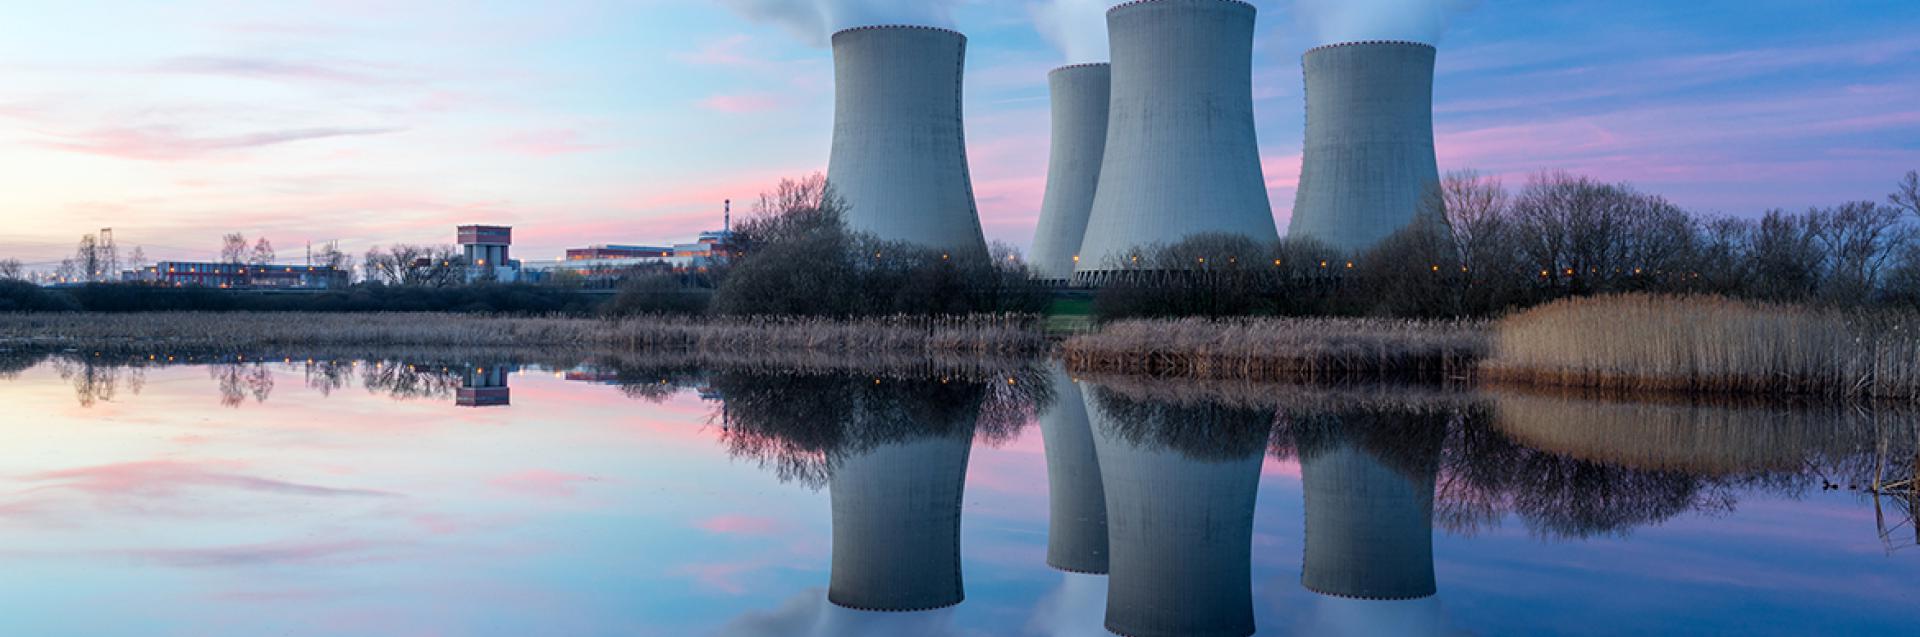 Biocides: cooling towers